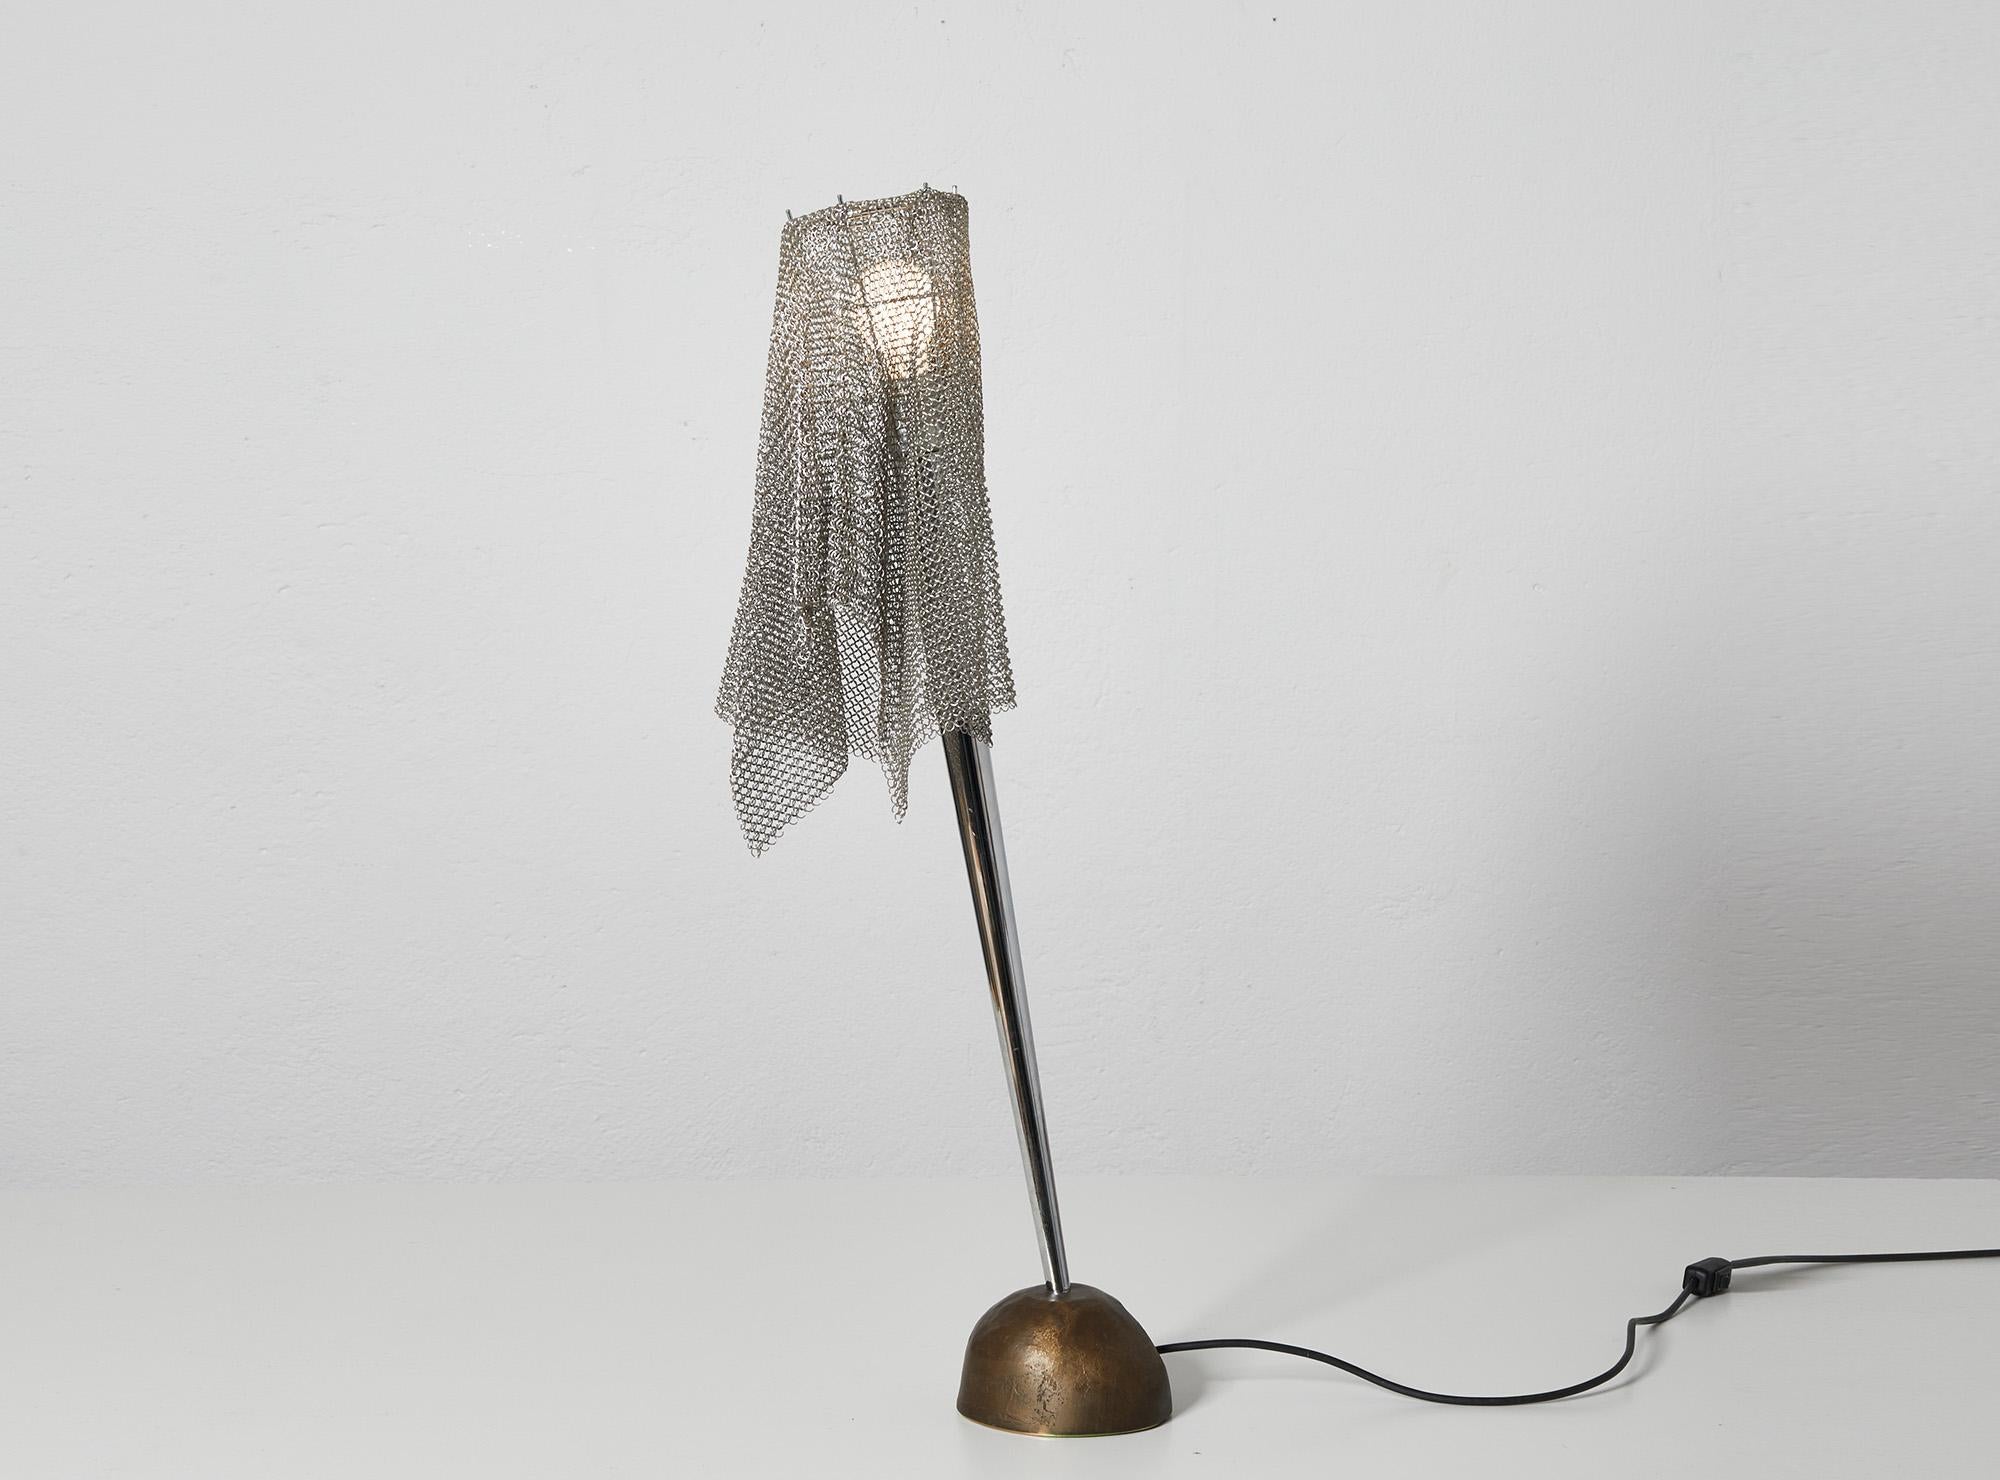 Ecate table lamp or light sculpture from the Milano-Torino series by Toni Cordero for Artemide, Italy.

The Ecate is the most sought after model from this series with its bronze fusion base inspired by a natural rock. 

The conical metal slanted